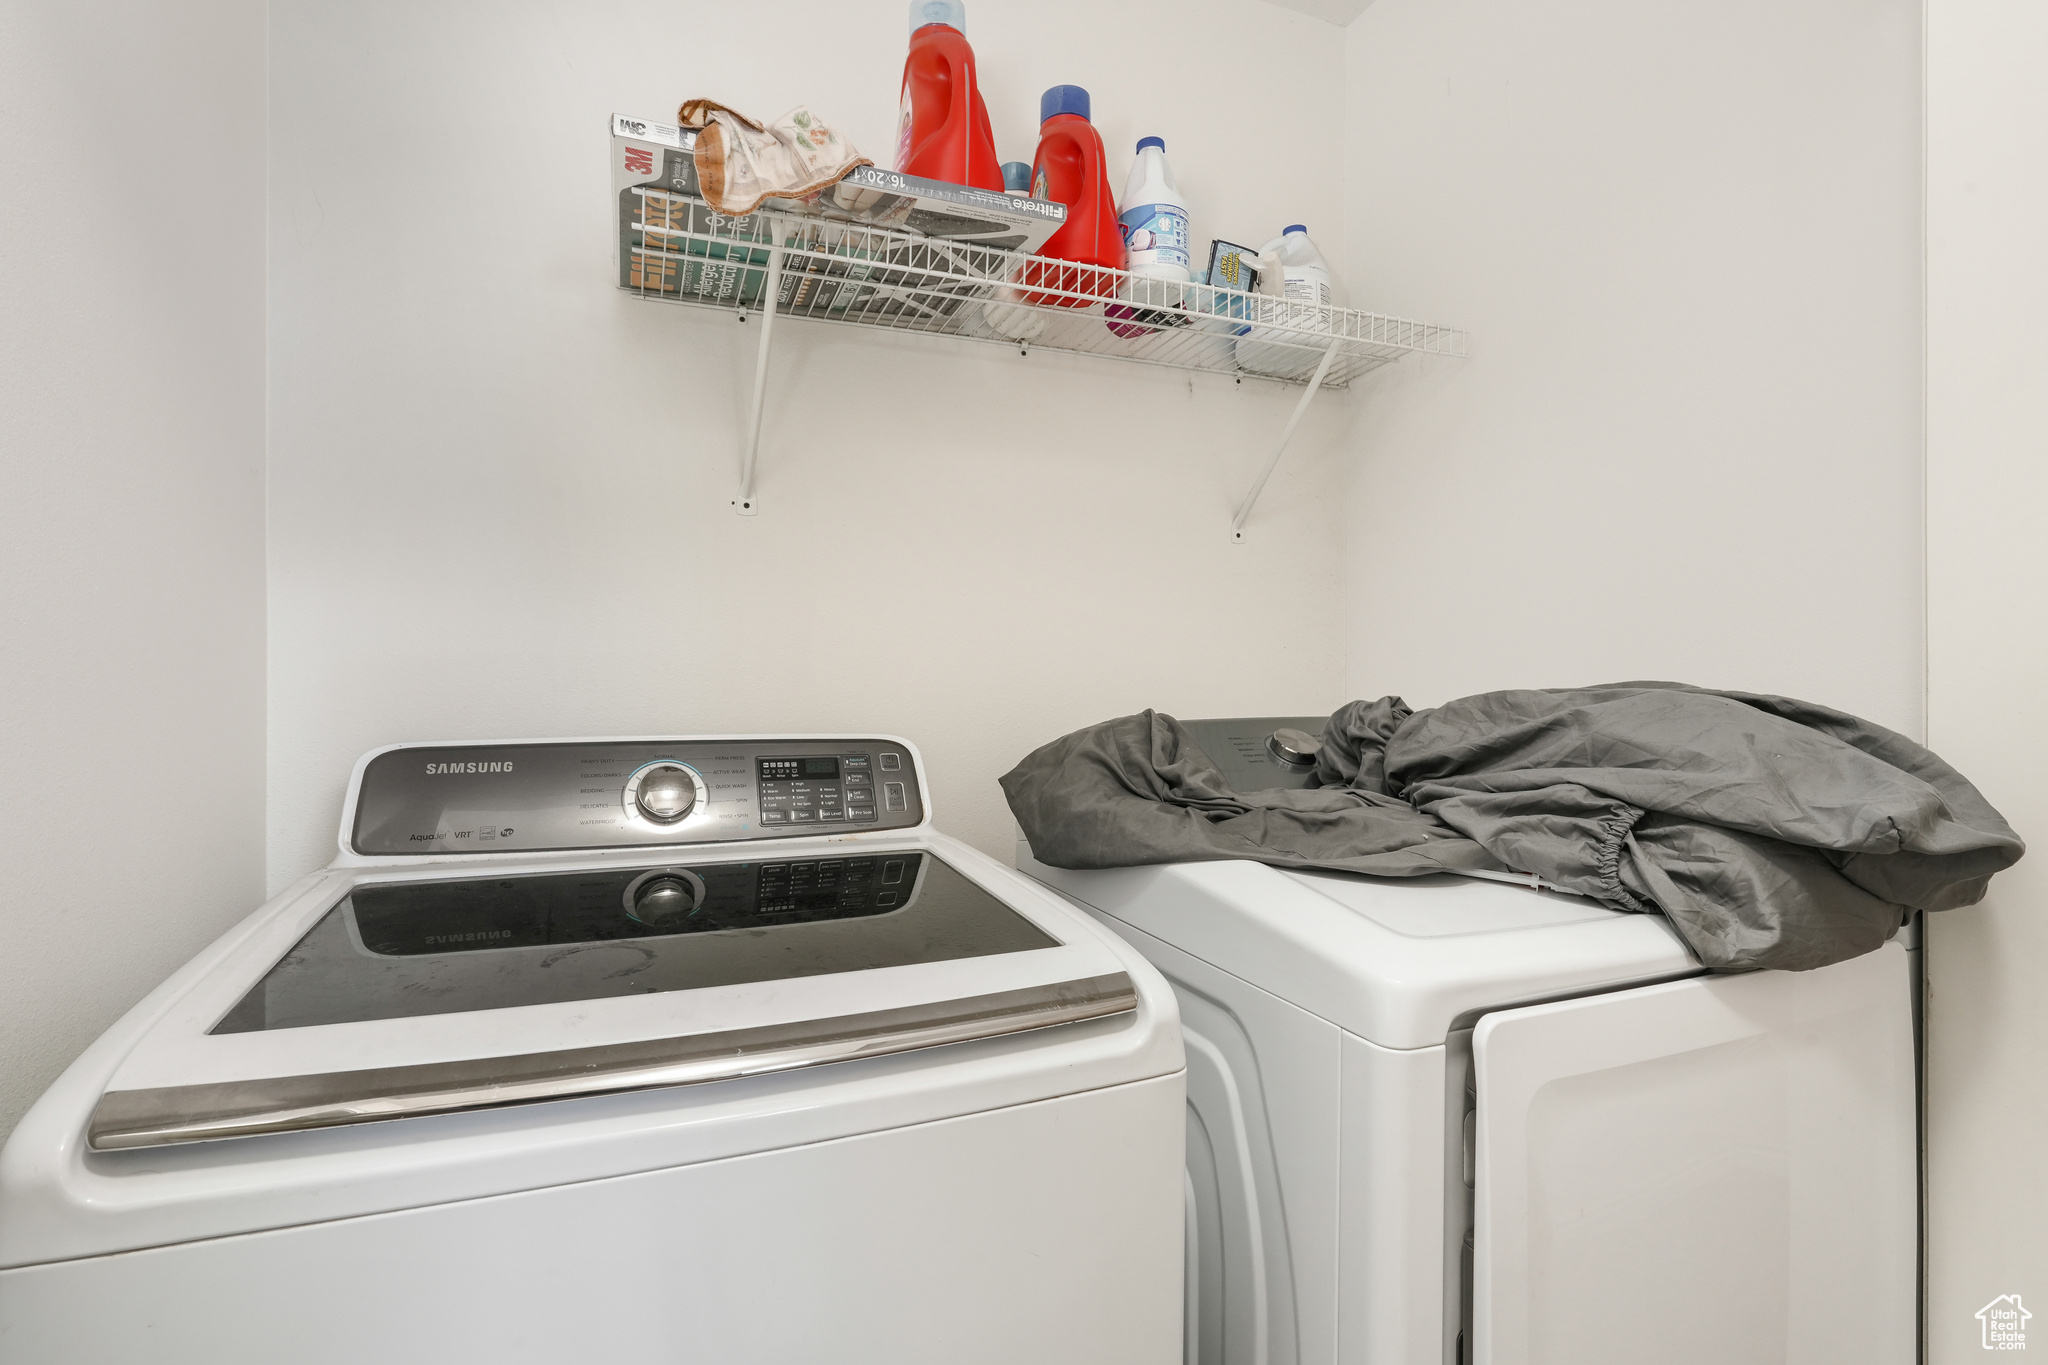 Laundry room featuring washer and dryer